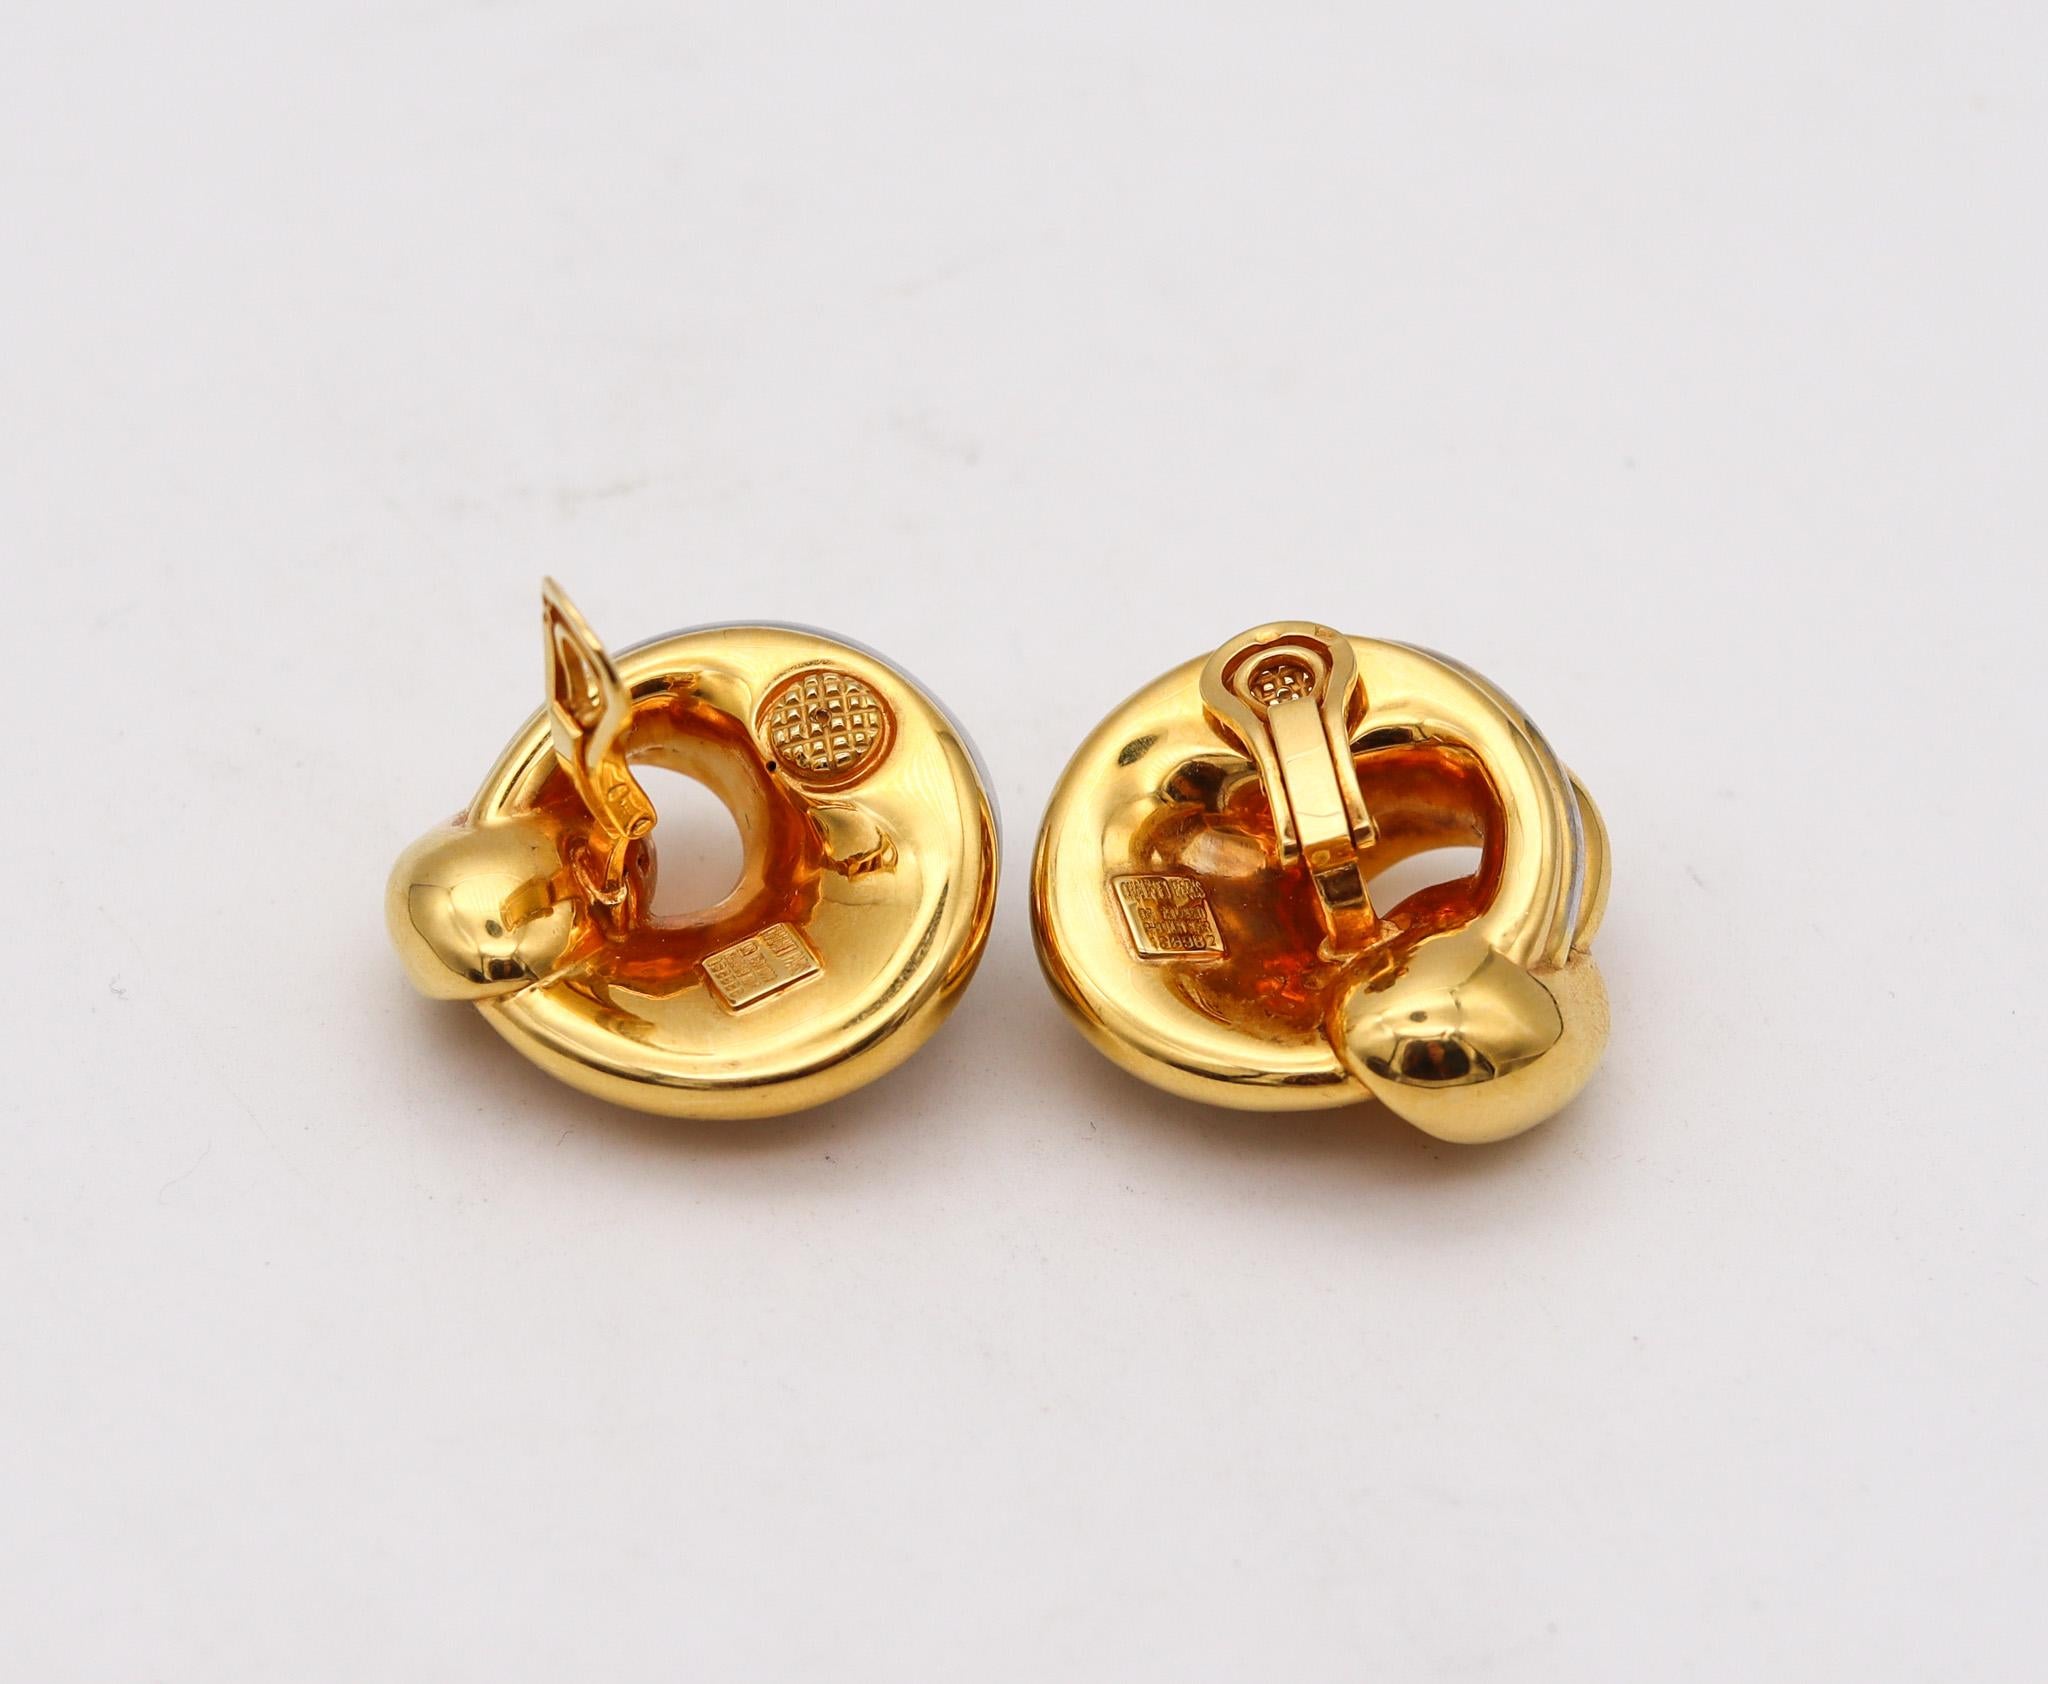 Chaumet Paris 1970 Twisted Modernist Earrings In 18Kt Yellow And White Gold In Excellent Condition For Sale In Miami, FL